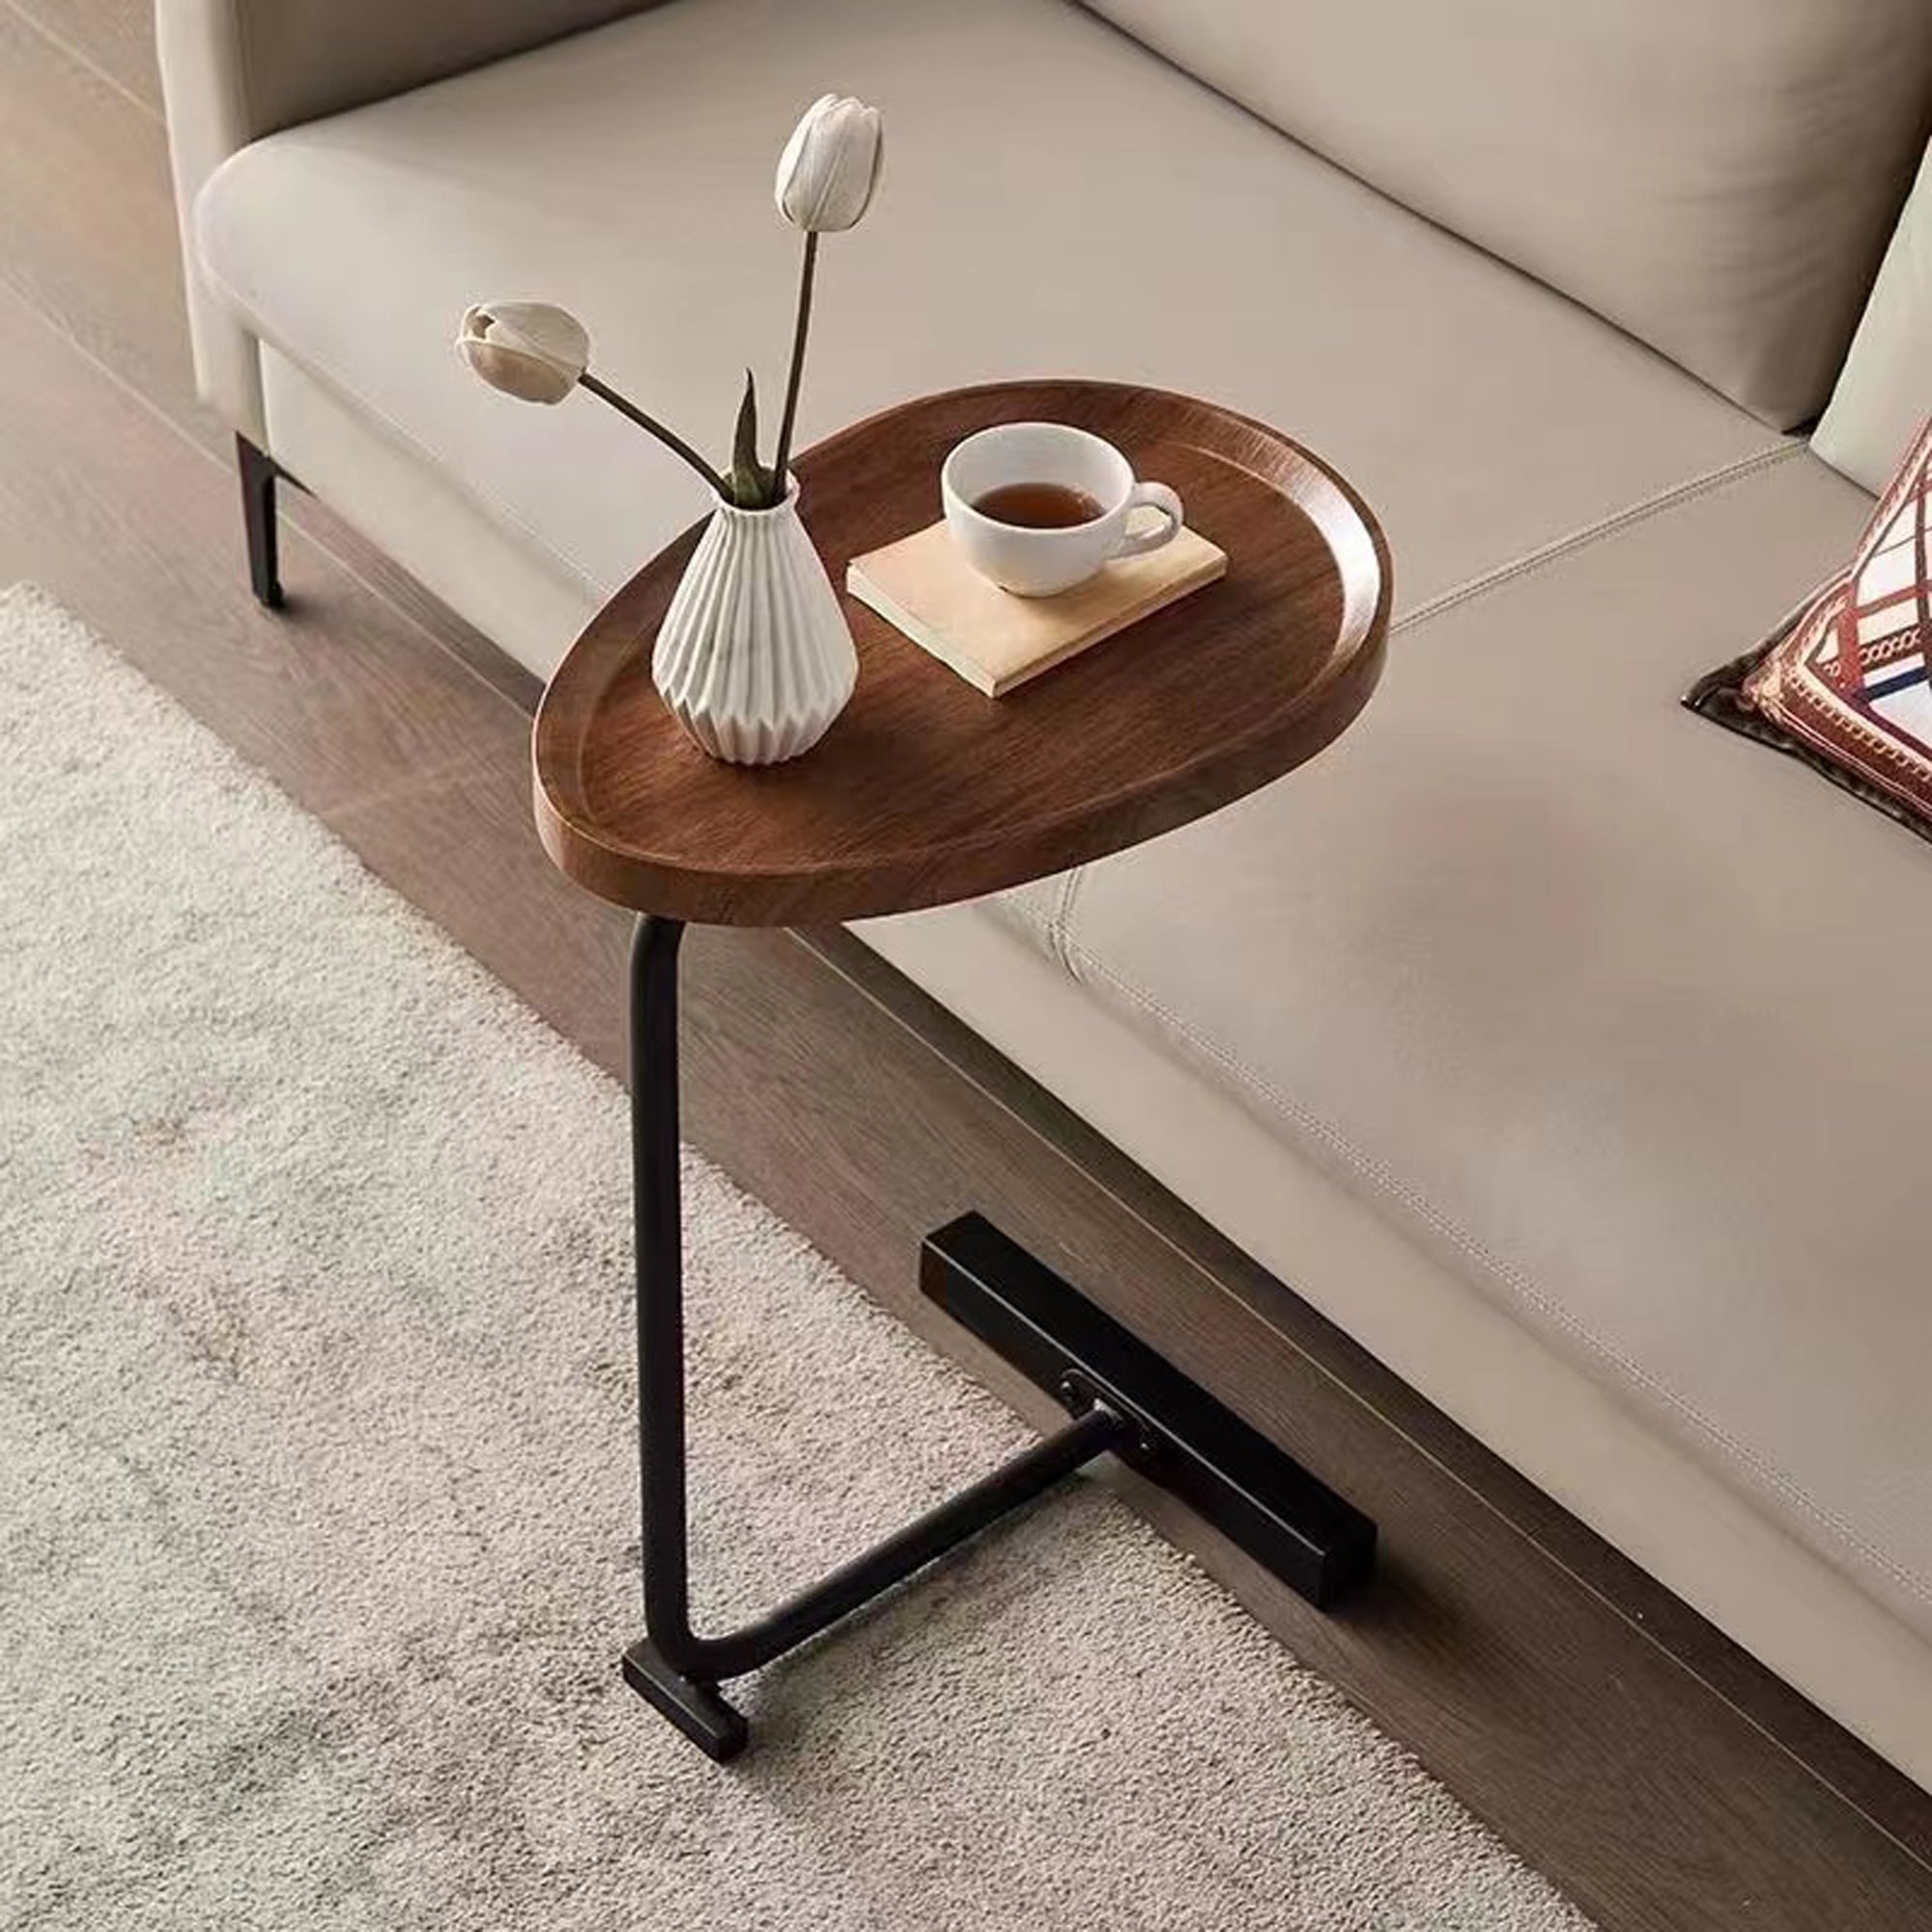 2-Piece Brown C-Shaped Side Table | Small Sofa Table for Small Spaces | Living Room, Bedroom | Stylish & Functional